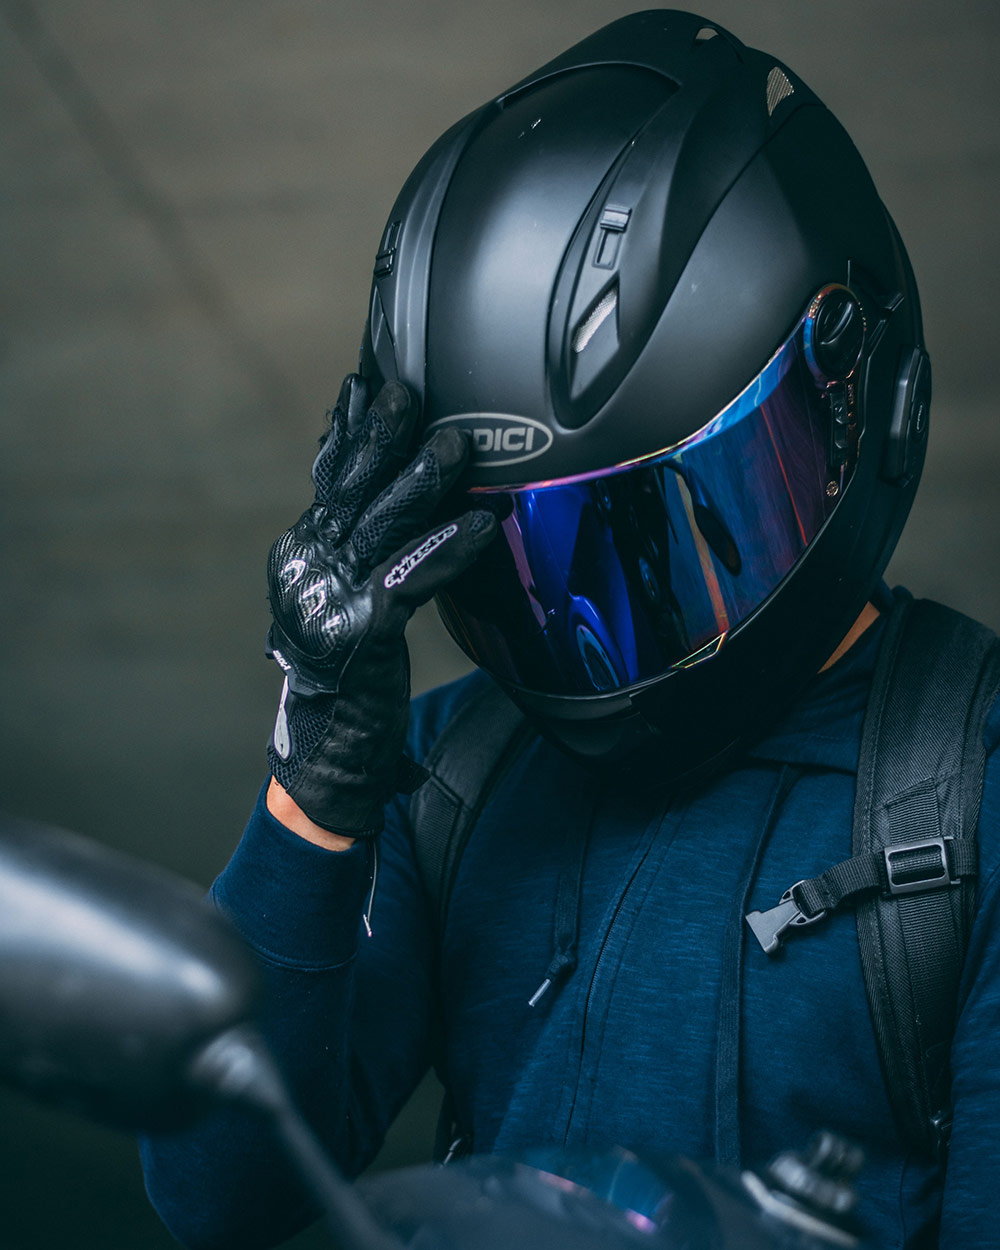 Invest on a quality helmet to keep you safe when riding your motorbike - Carousell Philippines